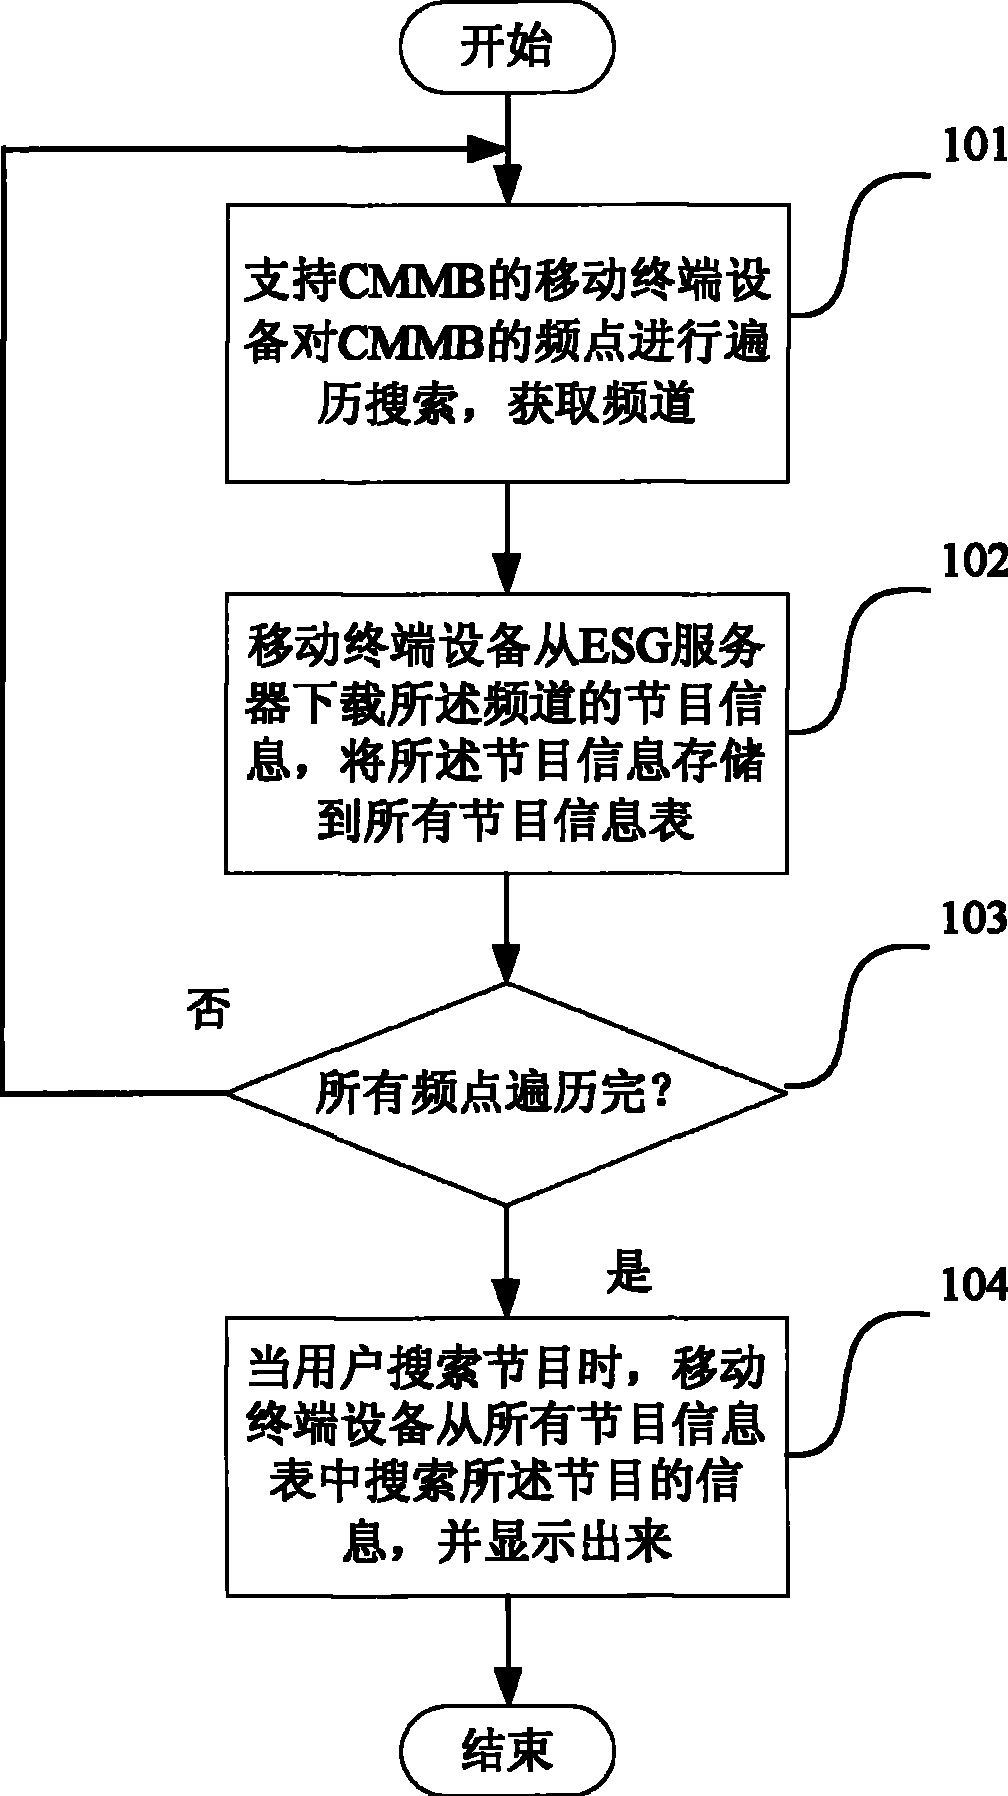 Method and apparatus for rapidly searching television program information